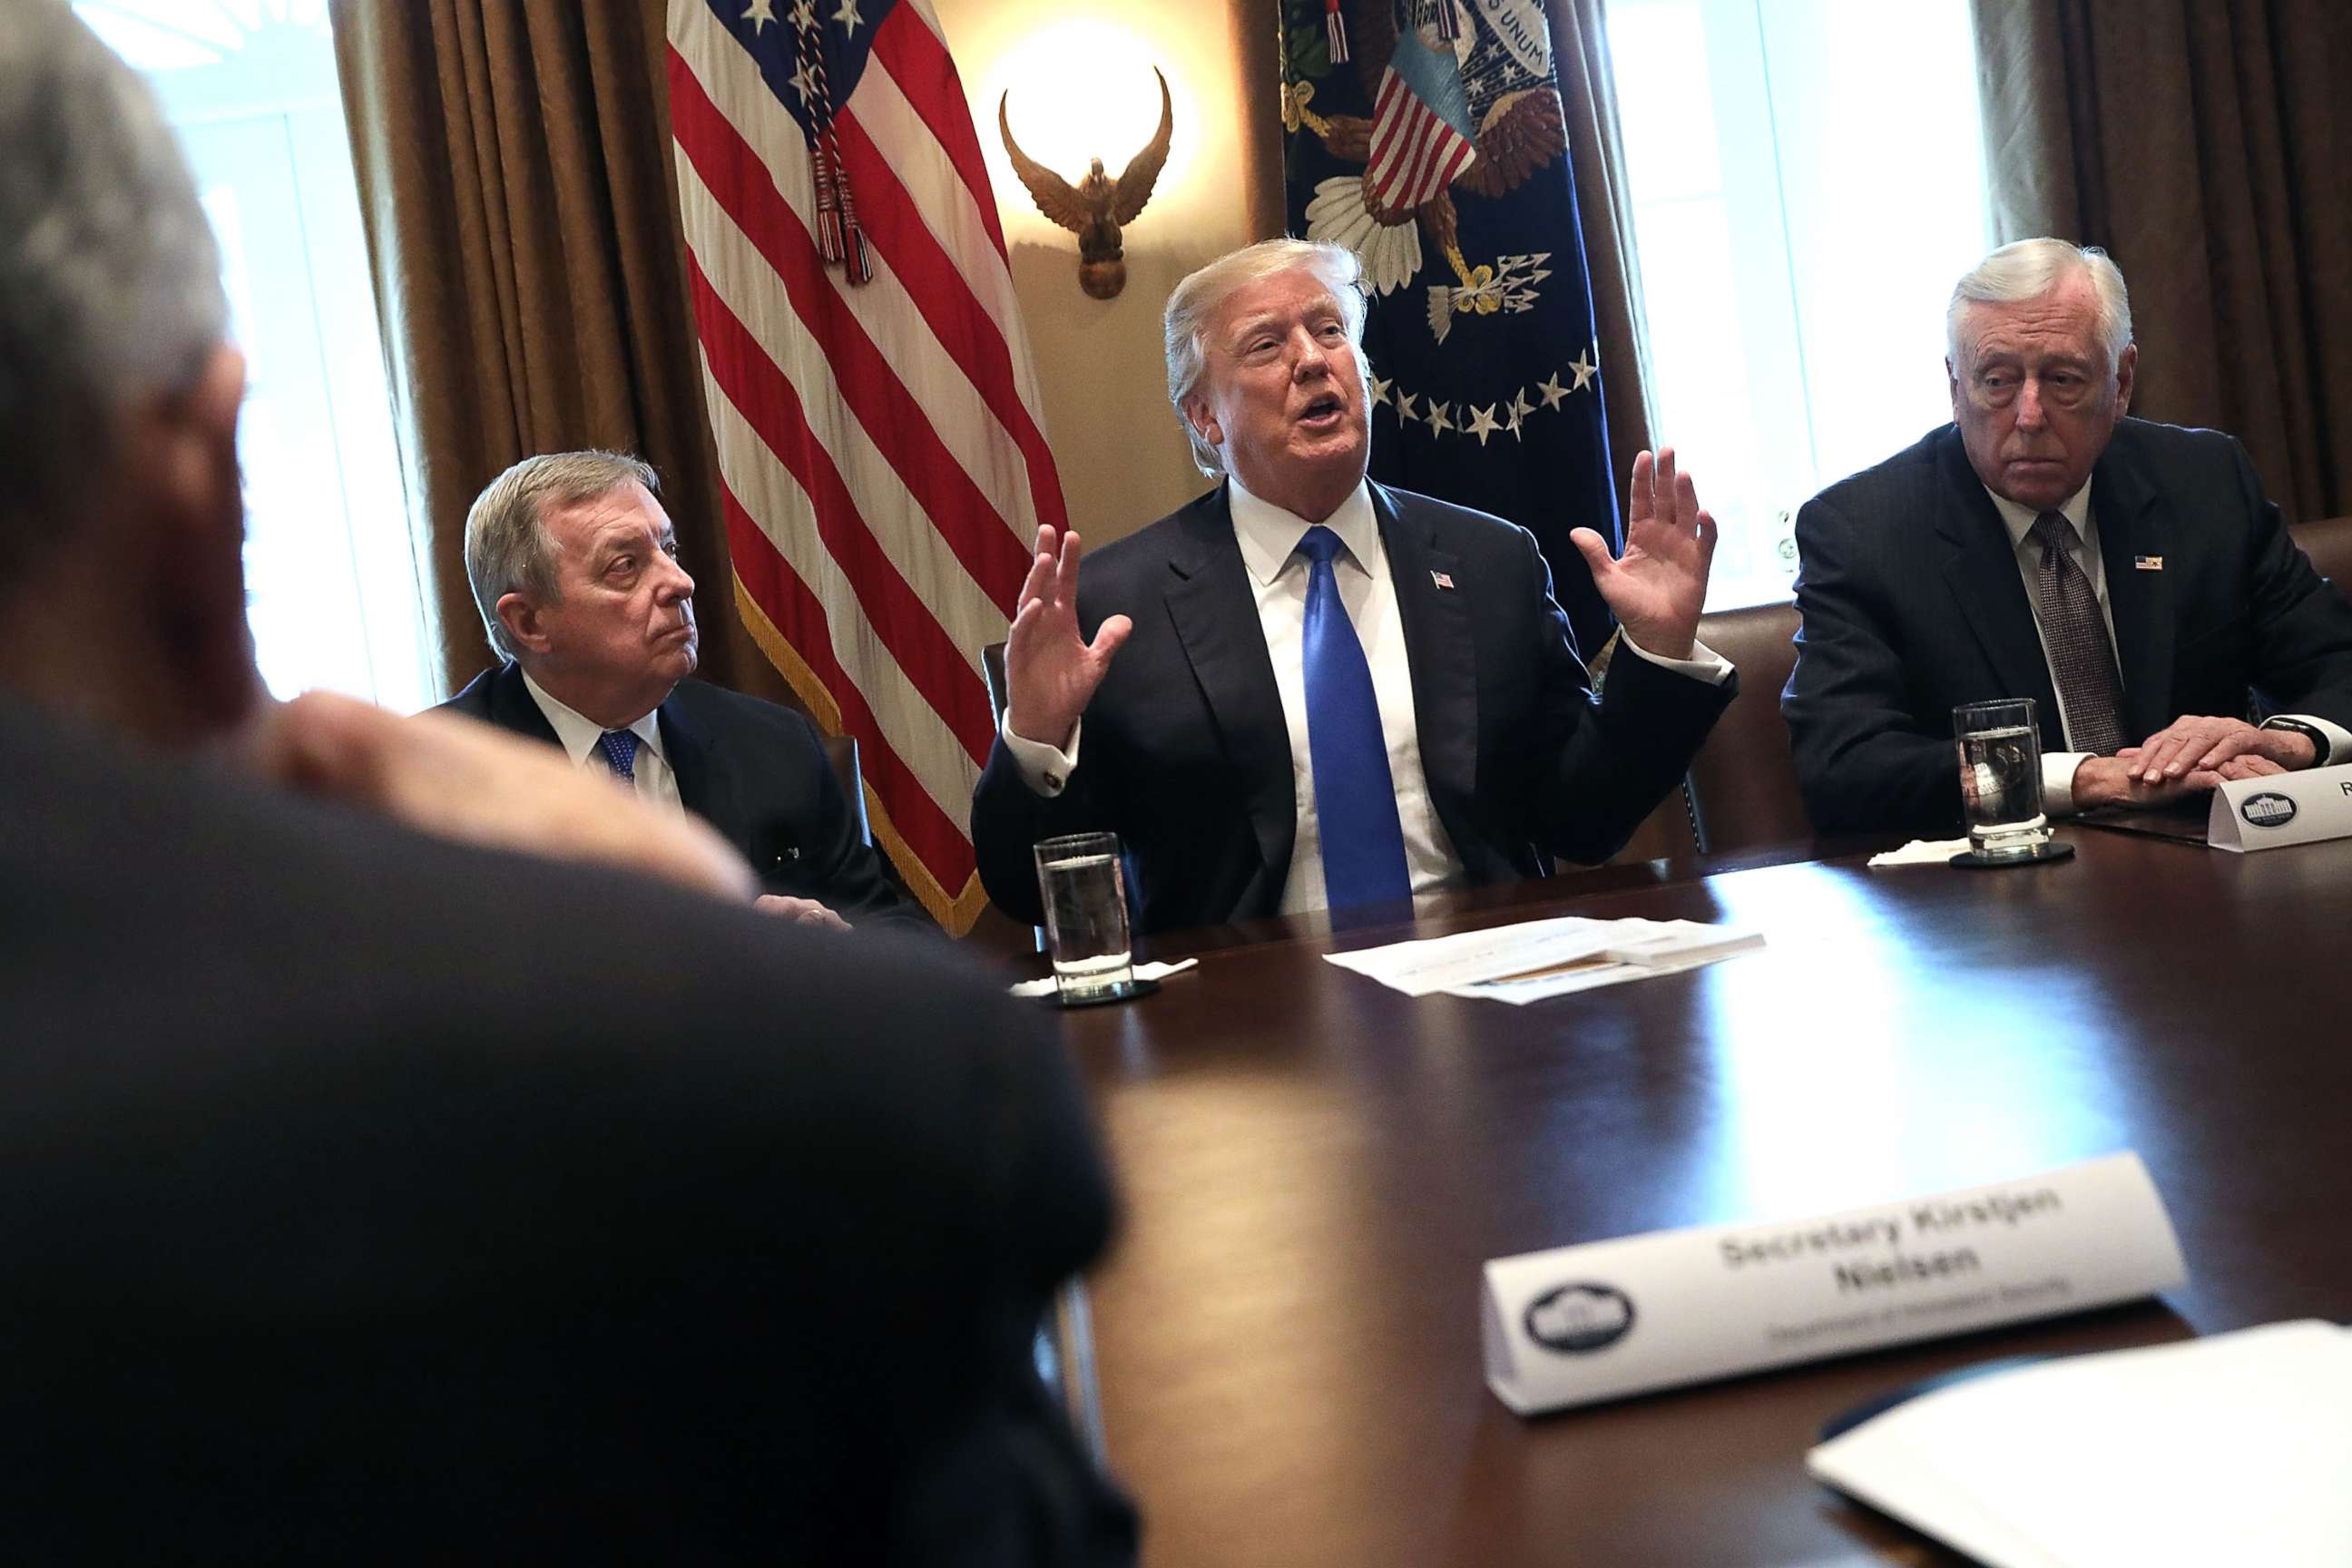 PHOTO: President Donald Trump (C) presides over a meeting about immigration with Republican and Democrat members of Congress, Jan. 9, 2018, in Washington.